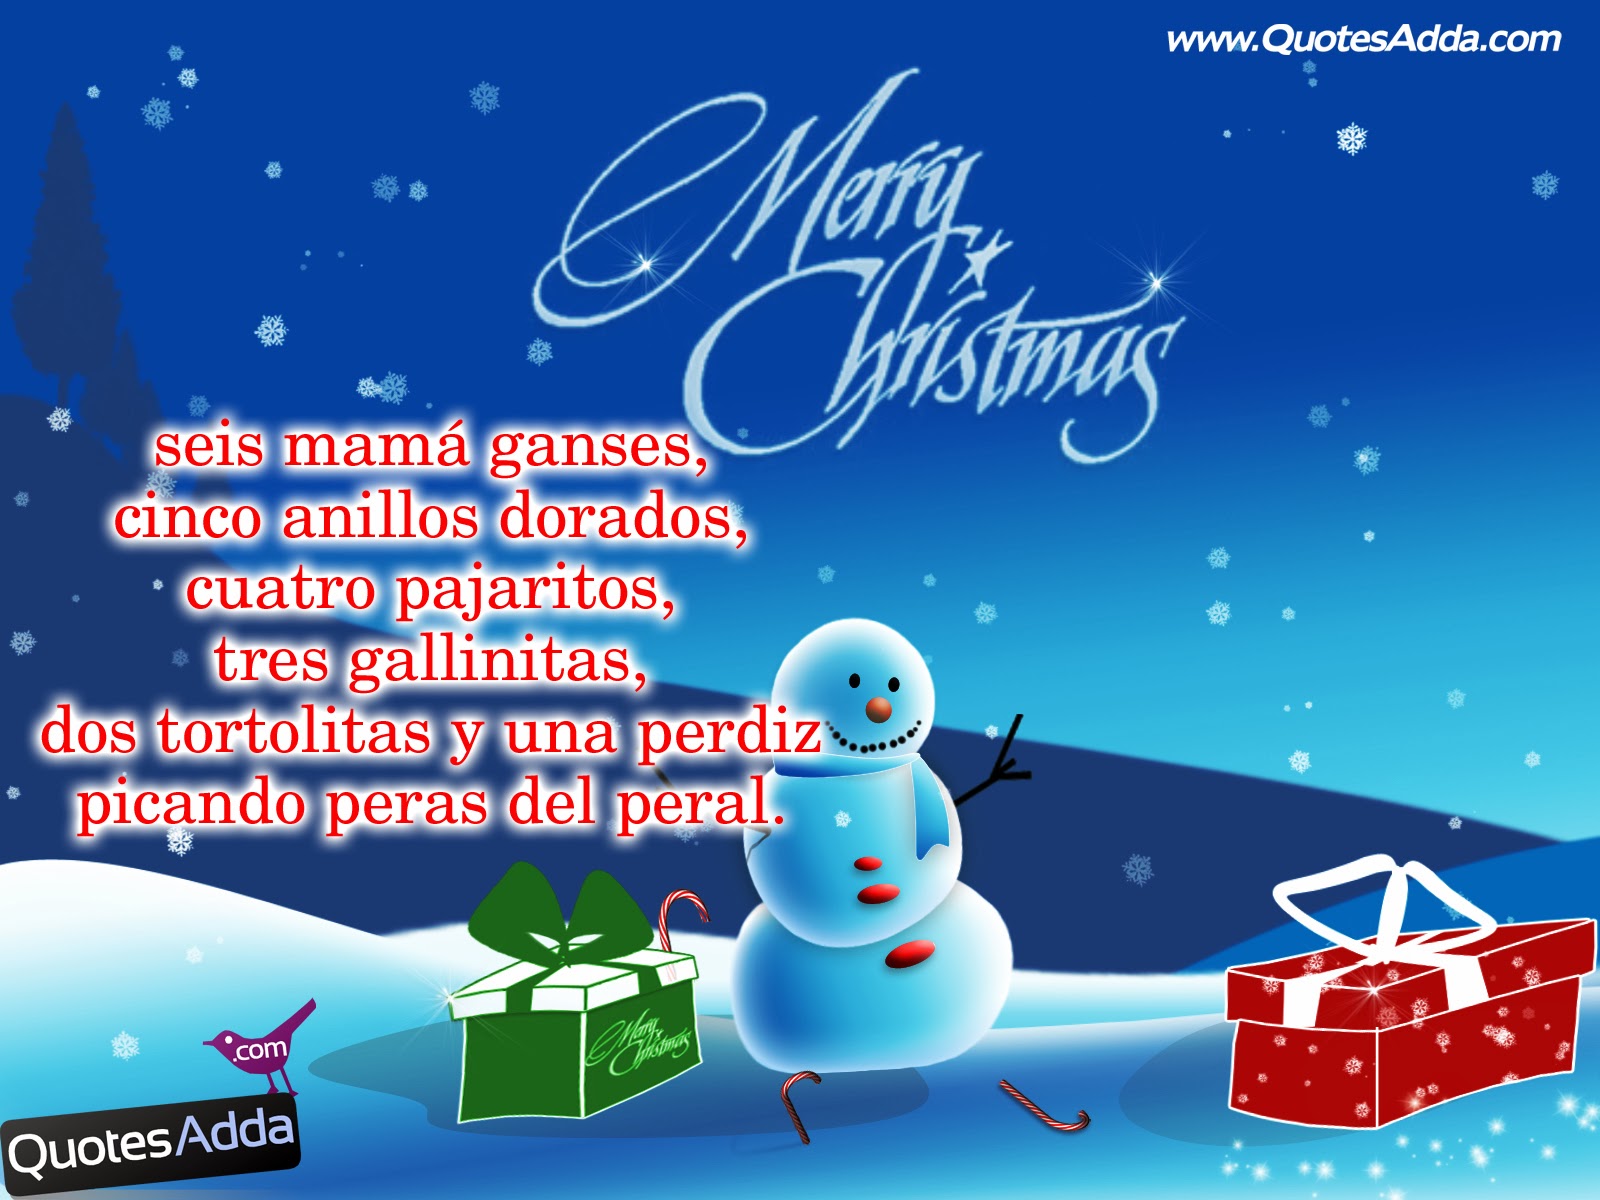 Marry Christmas Wallpaper In Spanish Language